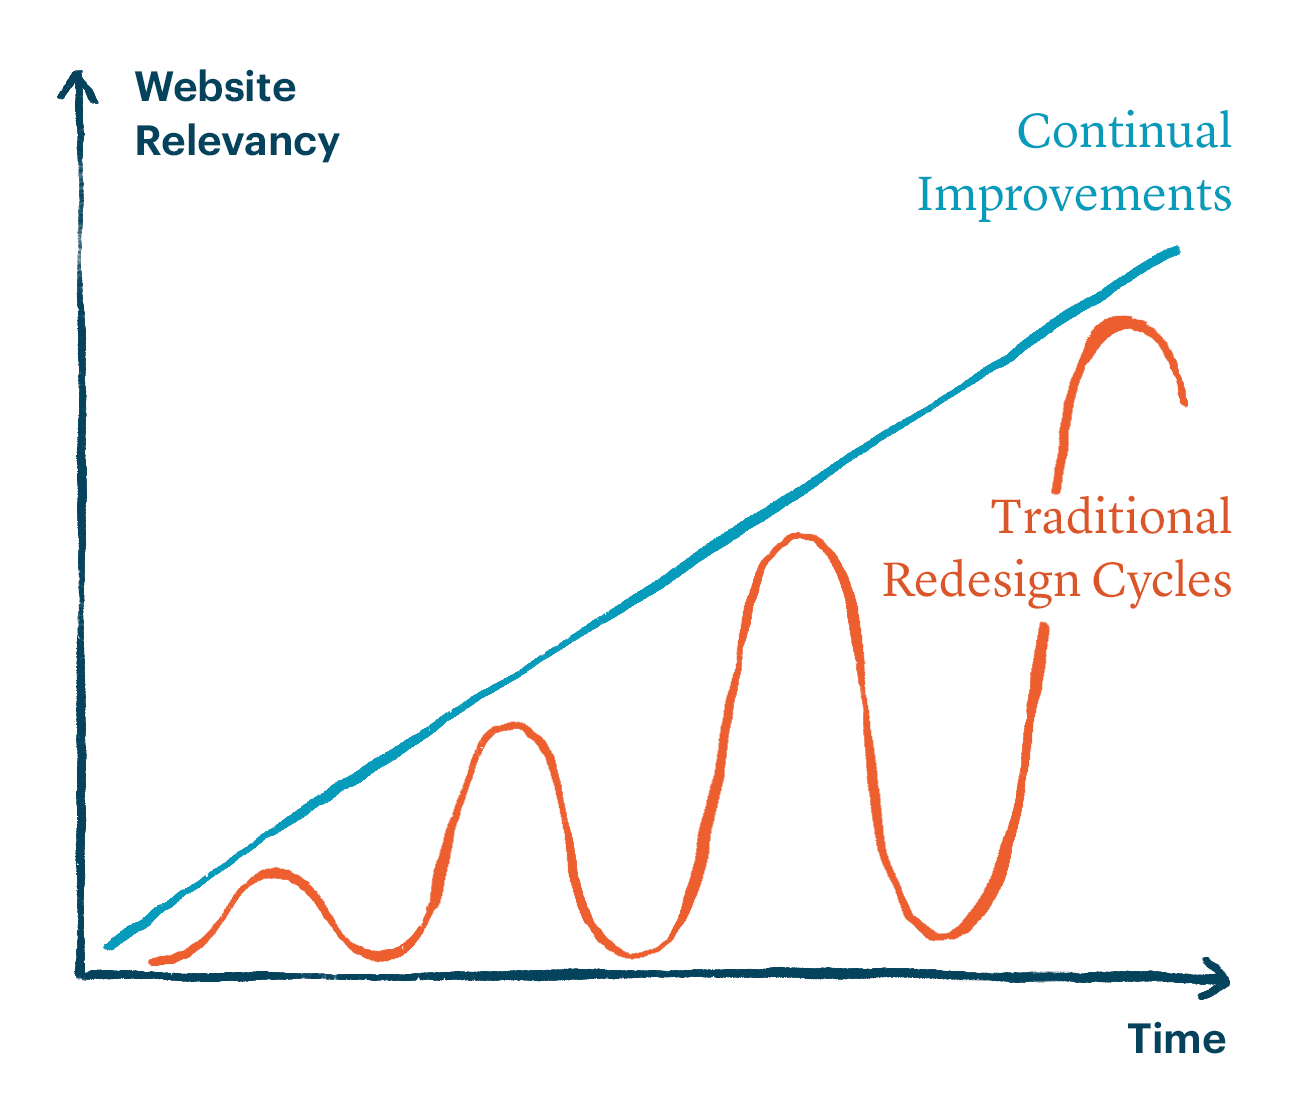 Website relevancy over time with continuous improvements v.s. traditional redesign cycles